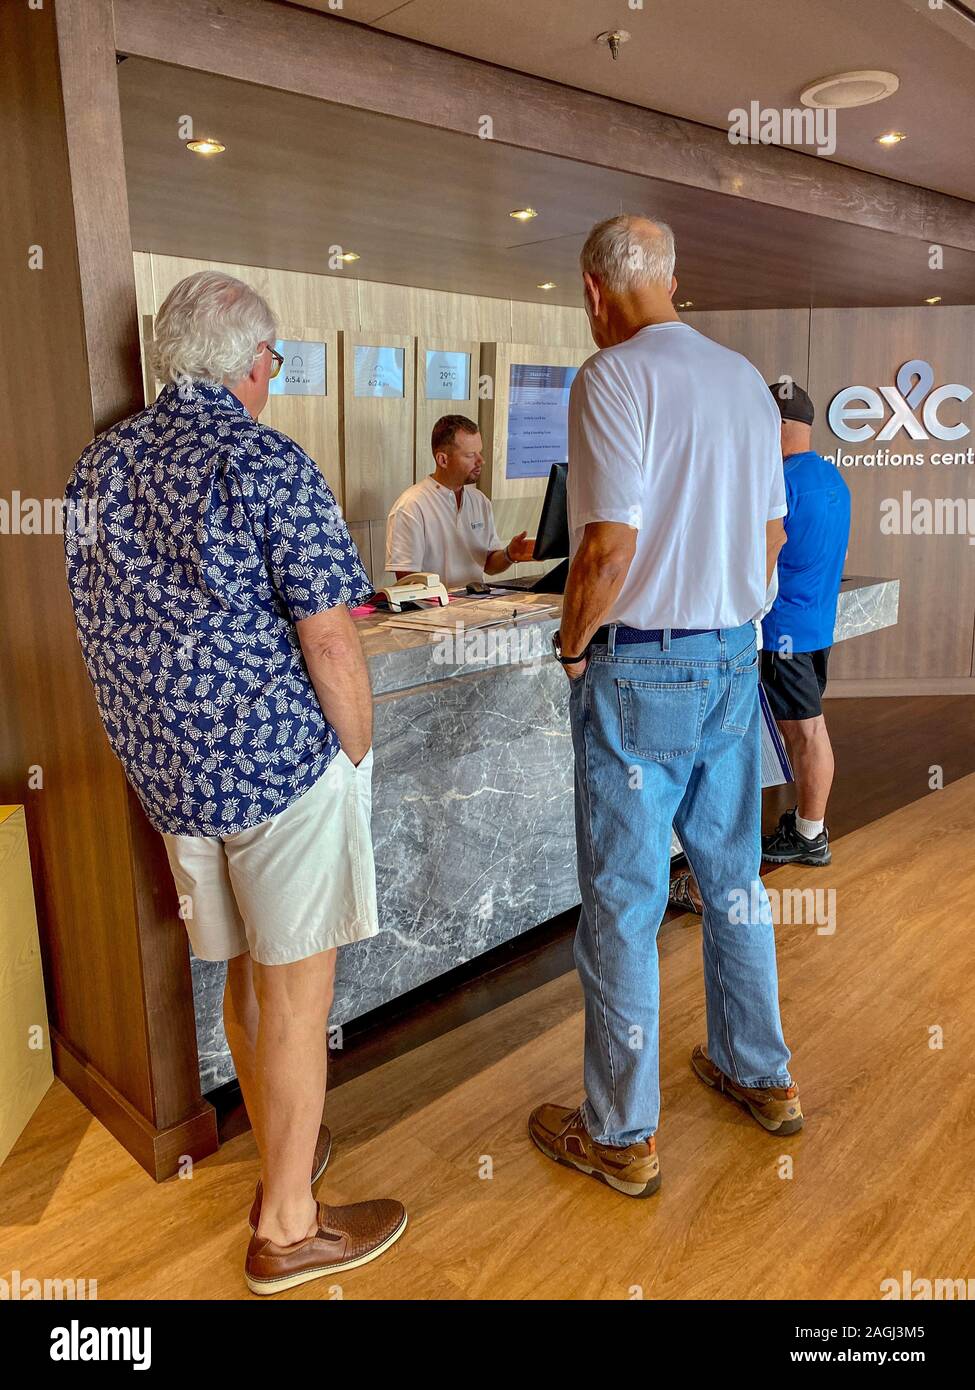 Ft. Lauderdale,FL/USA-11/1/19: Male passengers in line to inquire and purchase shore excursions from the crew of a Holland America Line cruise ship. Stock Photo